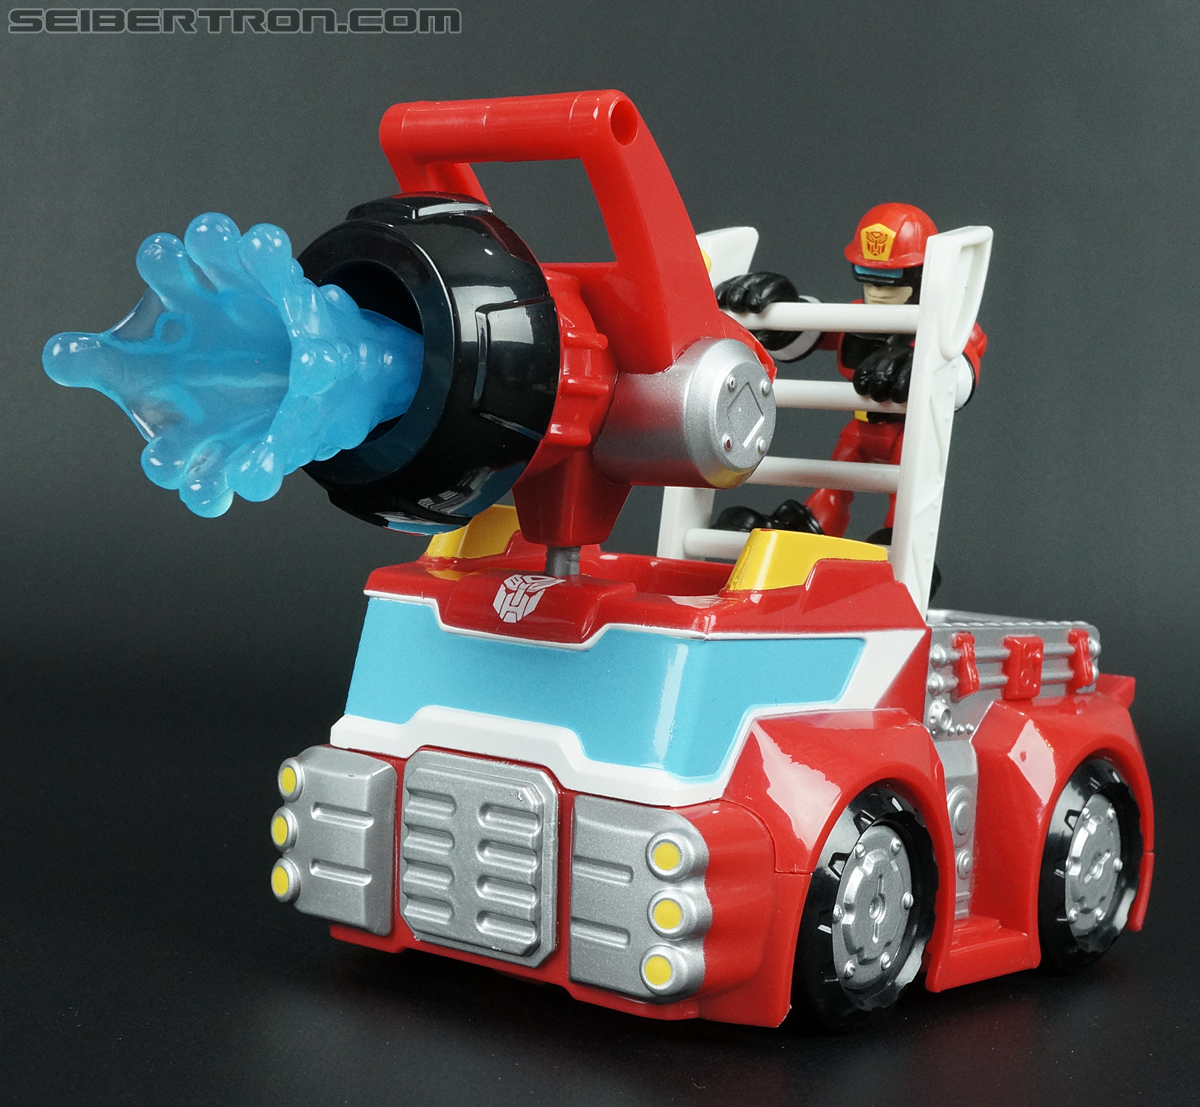 Transformers Rescue Bots Heatwave the Fire-Bot (Fire Station Prime) (Image #10 of 64)